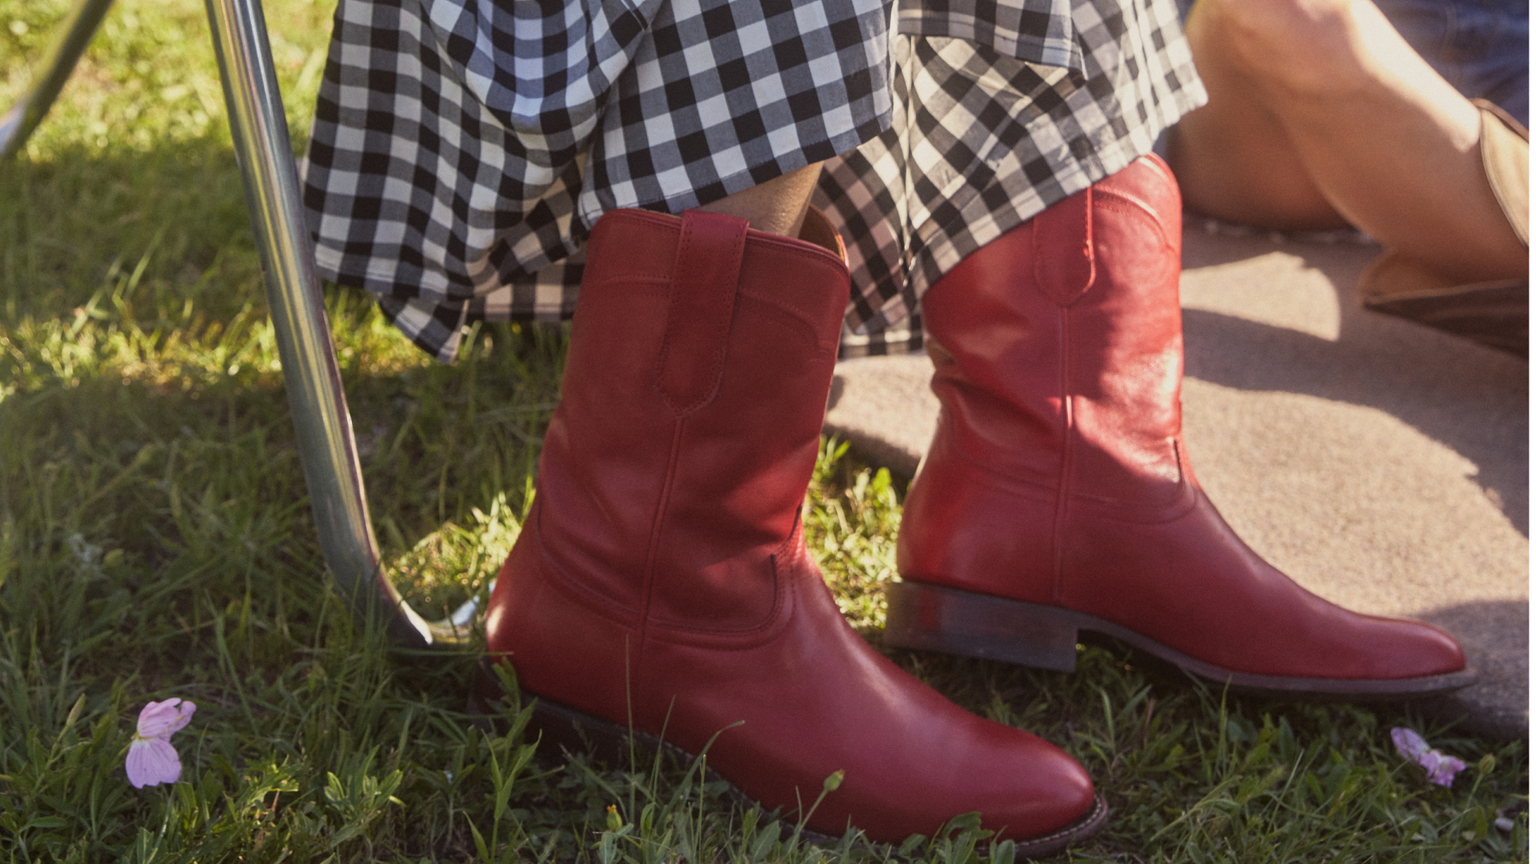 A person wearing red leather boots and a black and white checkered skirt sits outdoors on the grass.